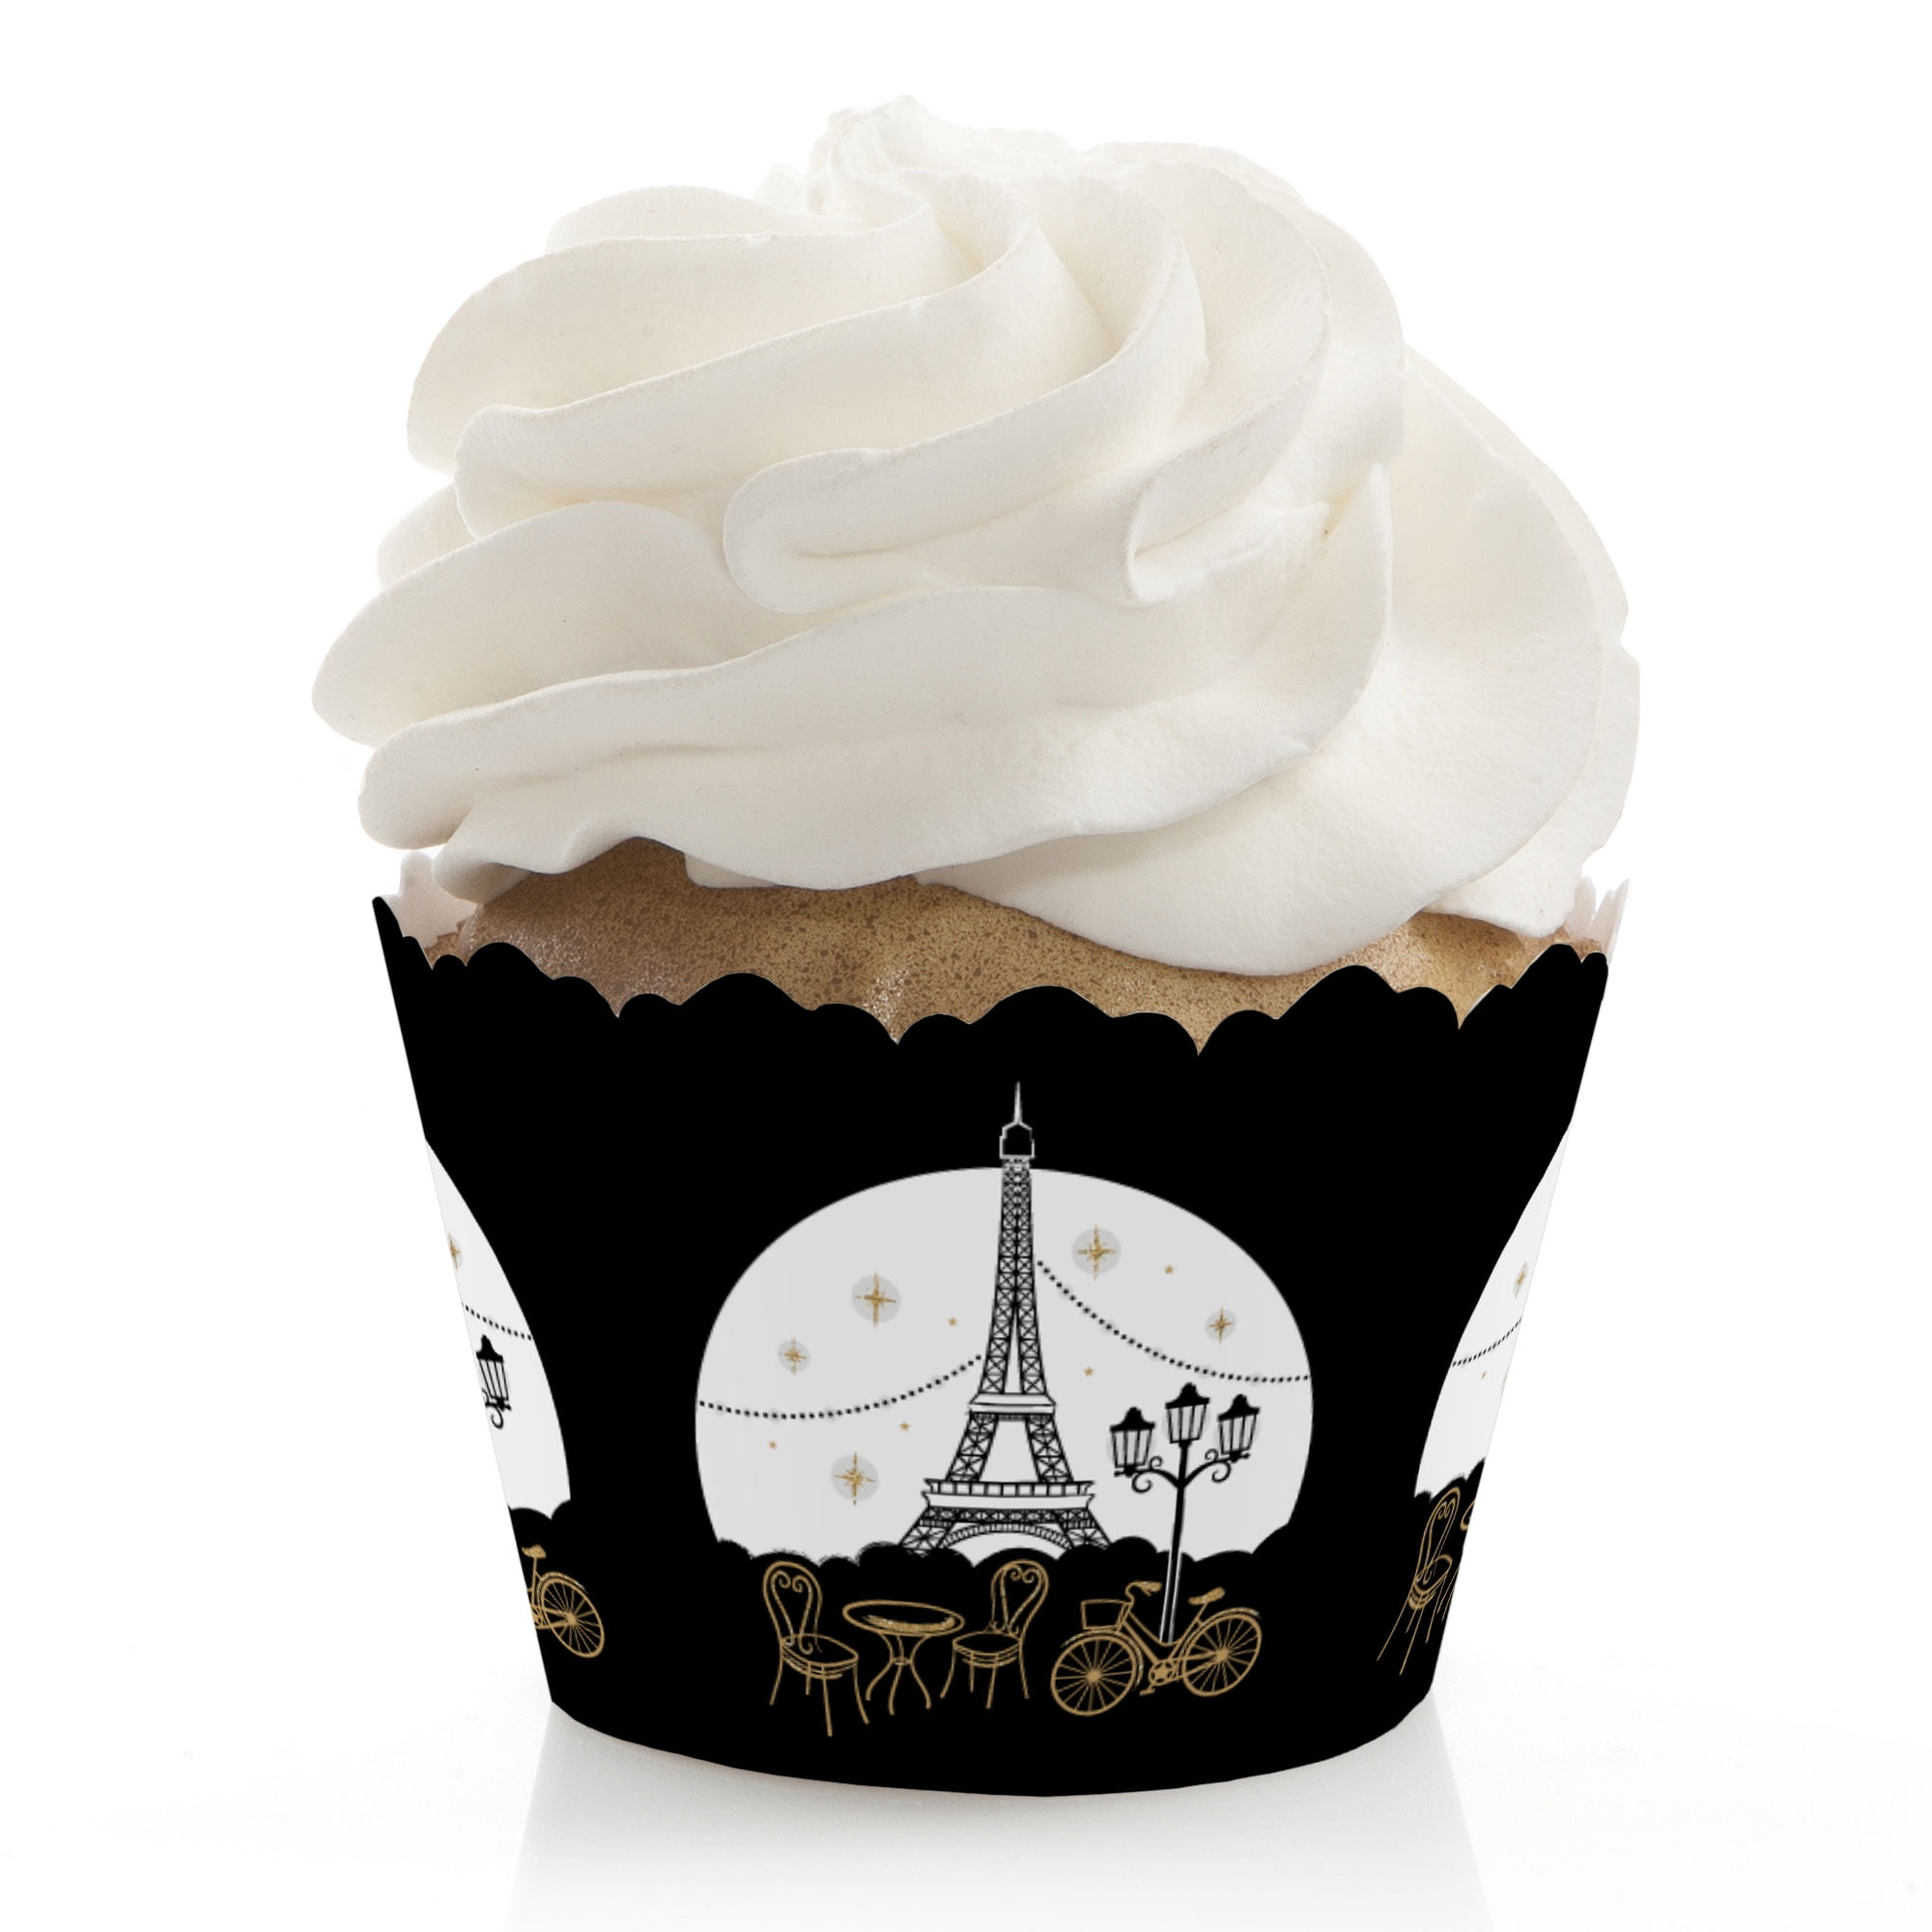 Eiffel Tower cupcake stand 3 tiers unpainted Paris themed party 